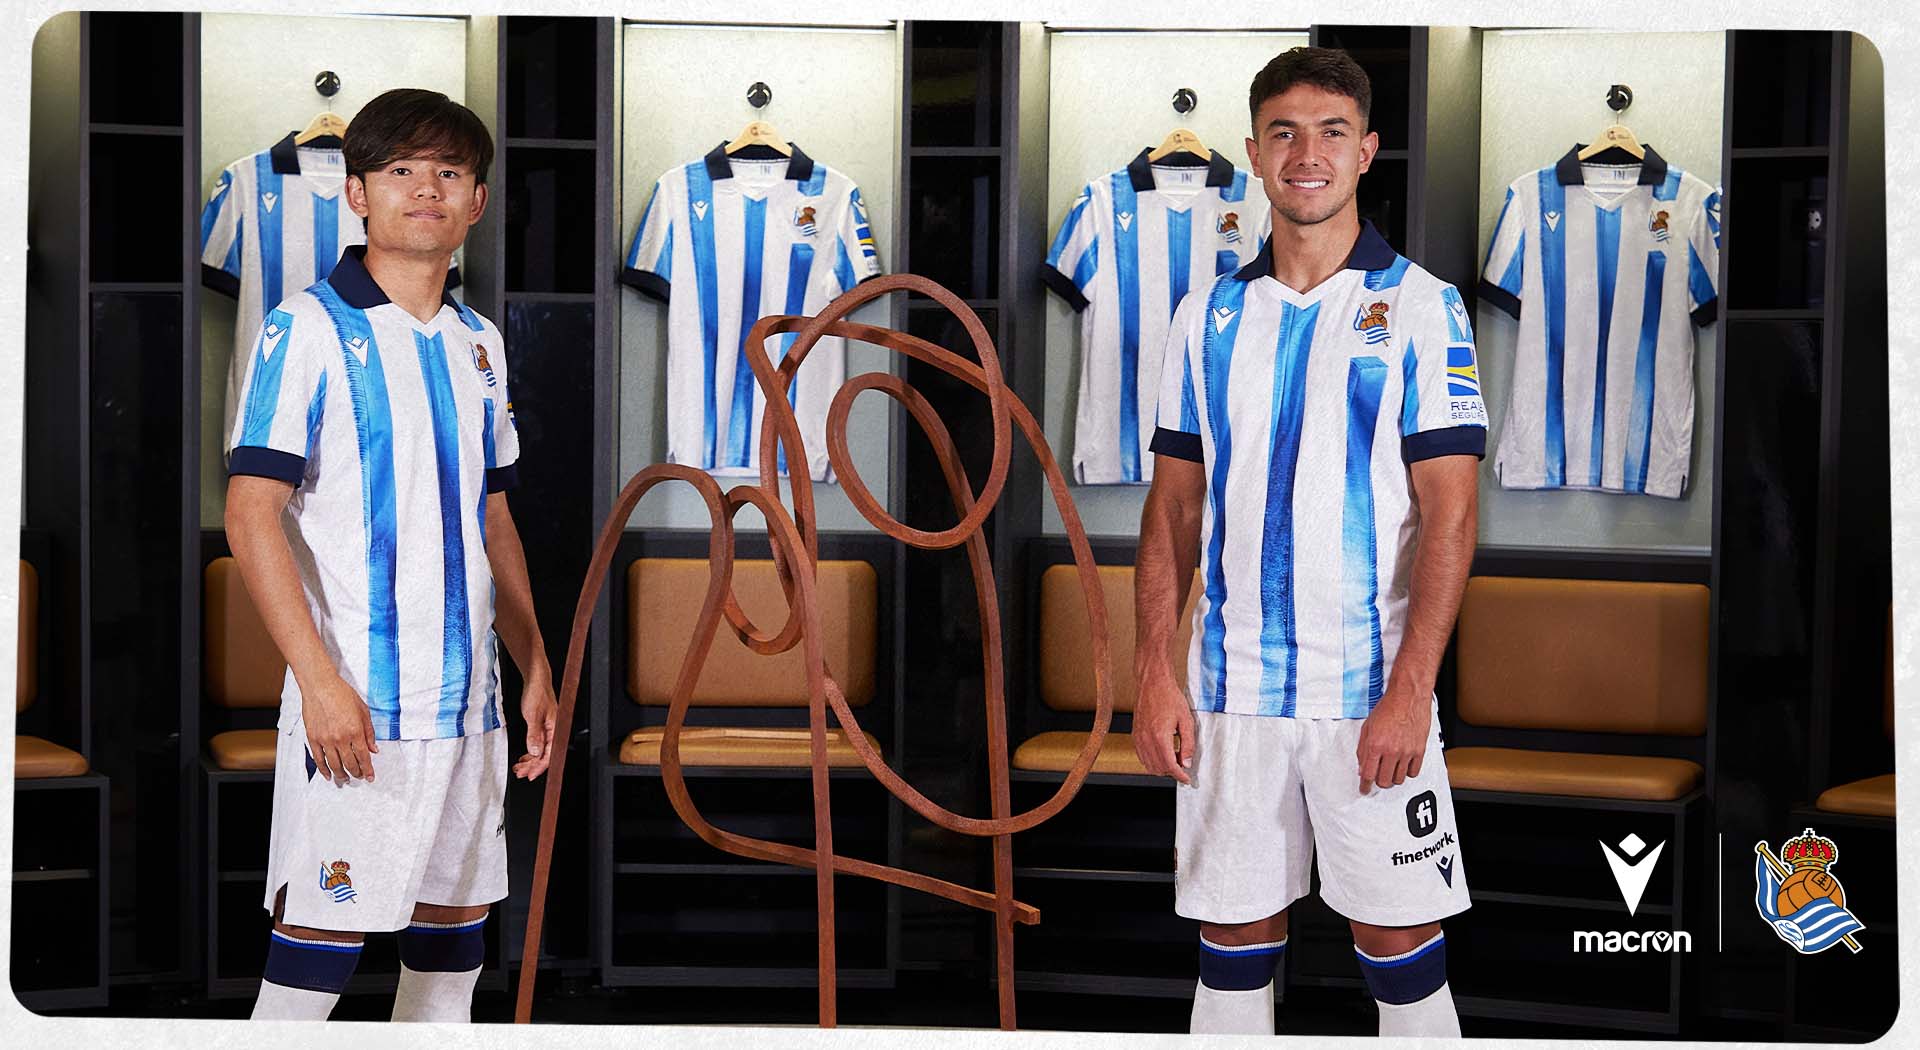 Sculptural' design and graphics for the new Home jersey of Real Sociedad